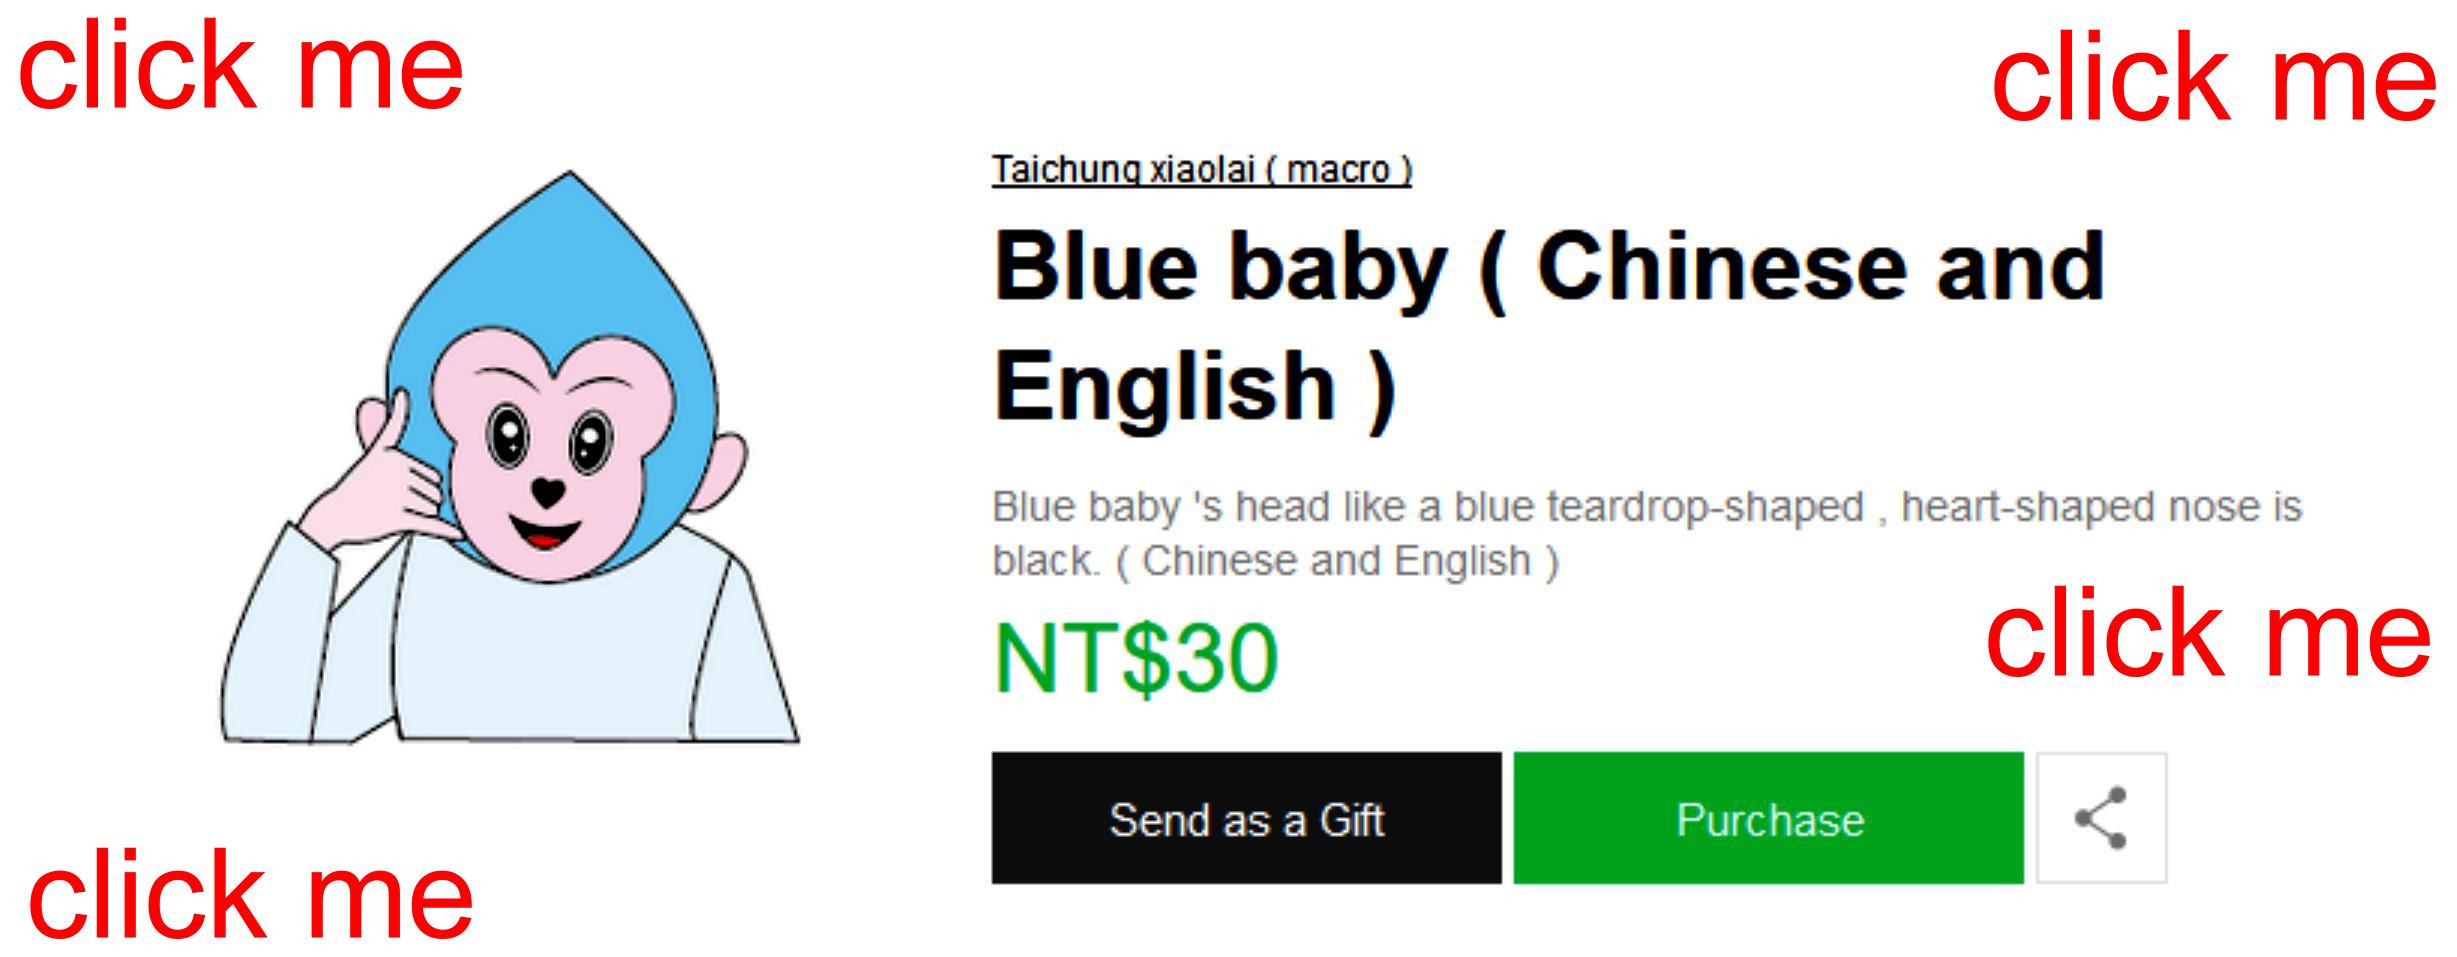 LINE STORE Stickers . Blue baby . Chinese and English . 40 sheets . Author Taichung xiaolai .  - 20161130132511-483675899.JPG(圖)